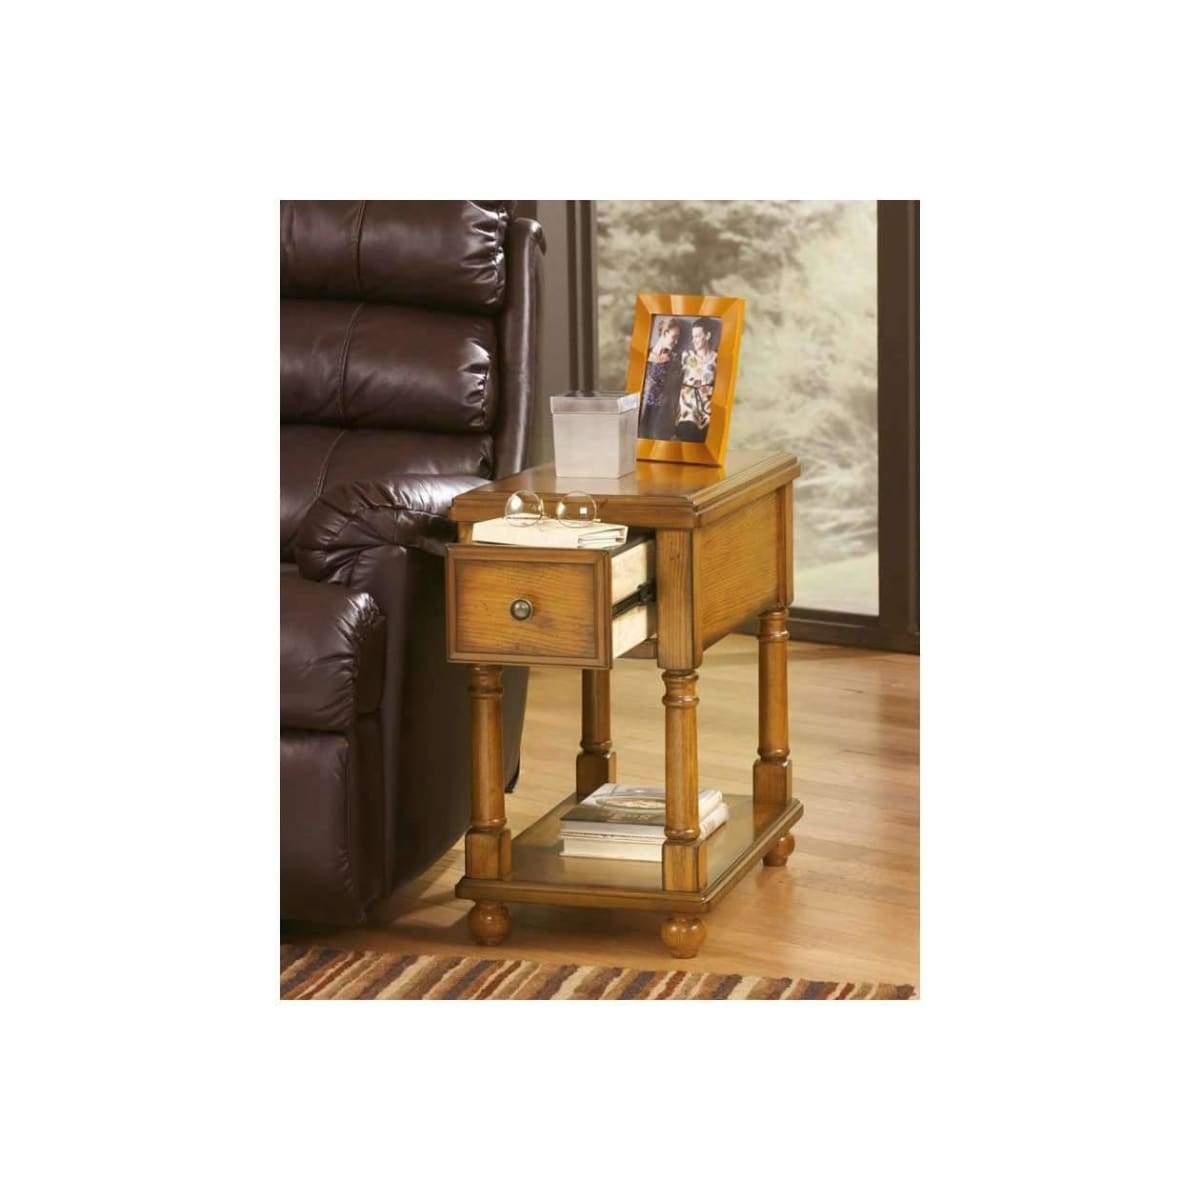 Breegin Light Brown Chairside End Table - END TABLE/SIDE TABLE